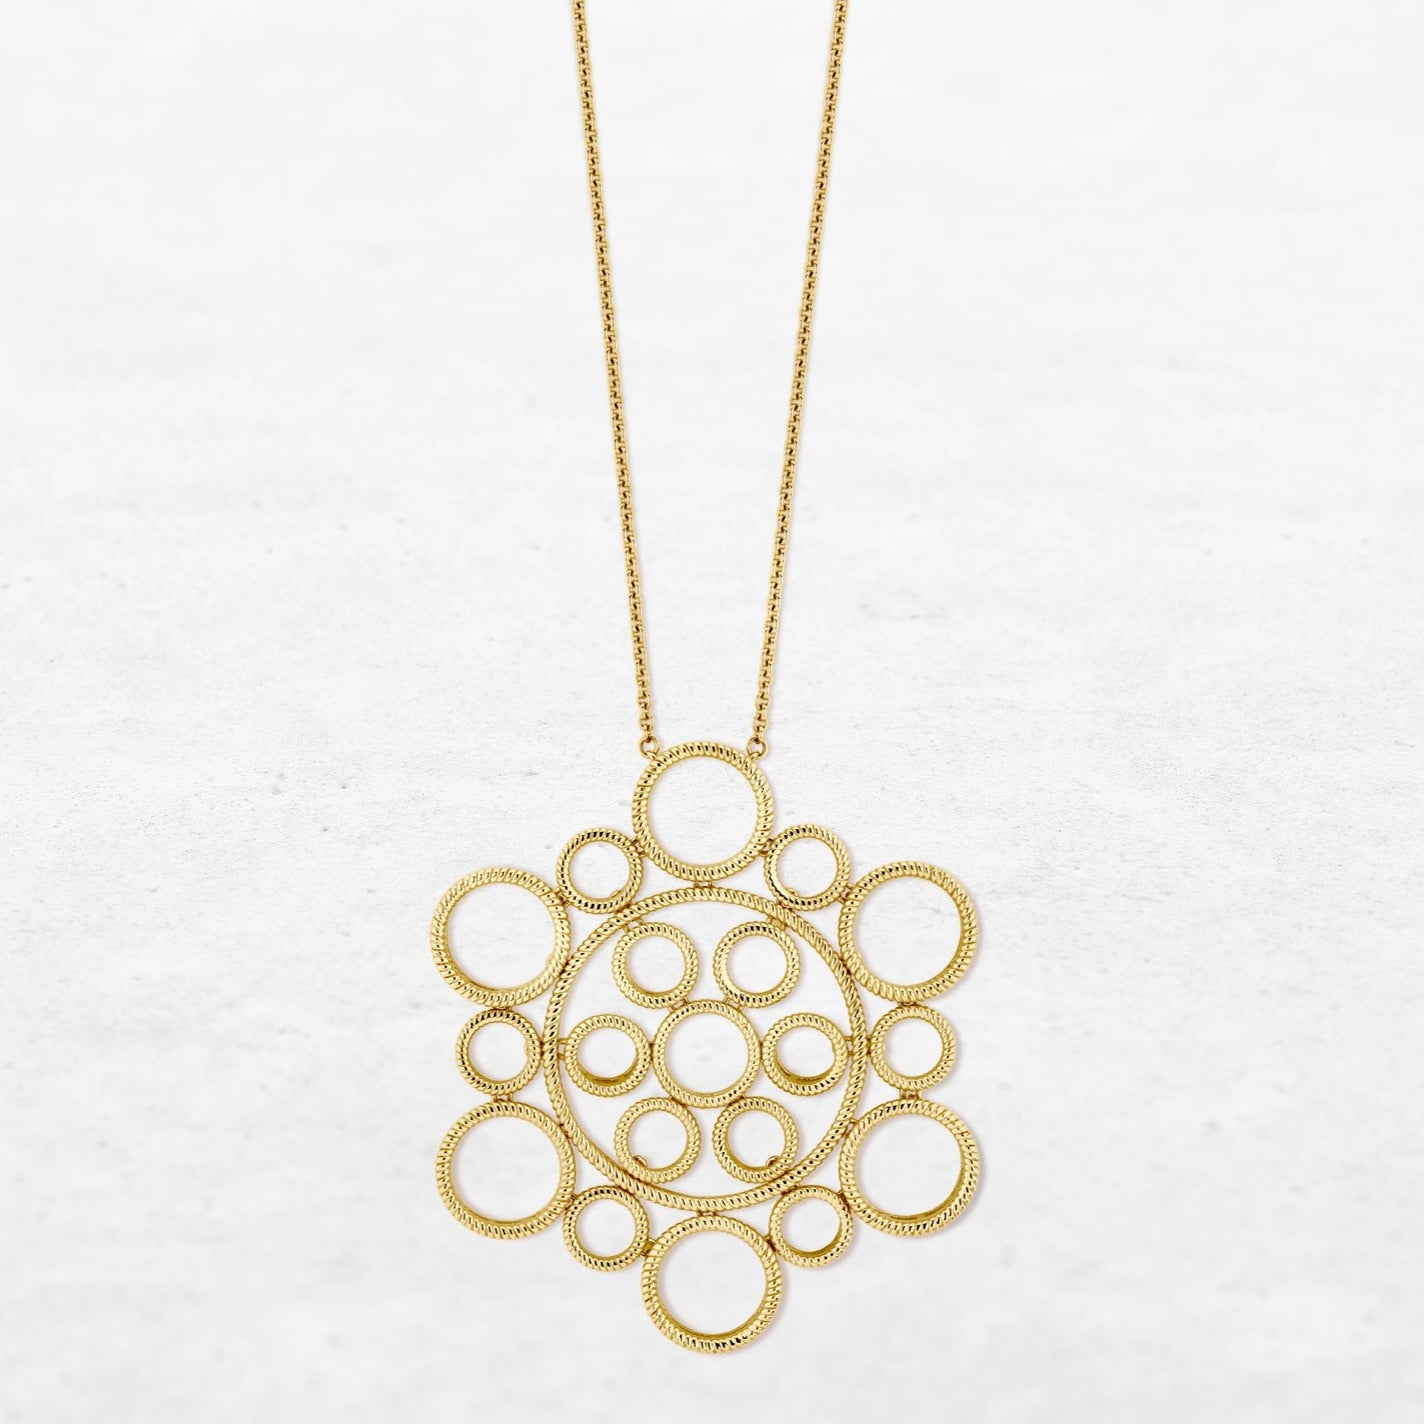 Necklace with different circular shapes in different sizes in yellow gold made by O! Jewelry